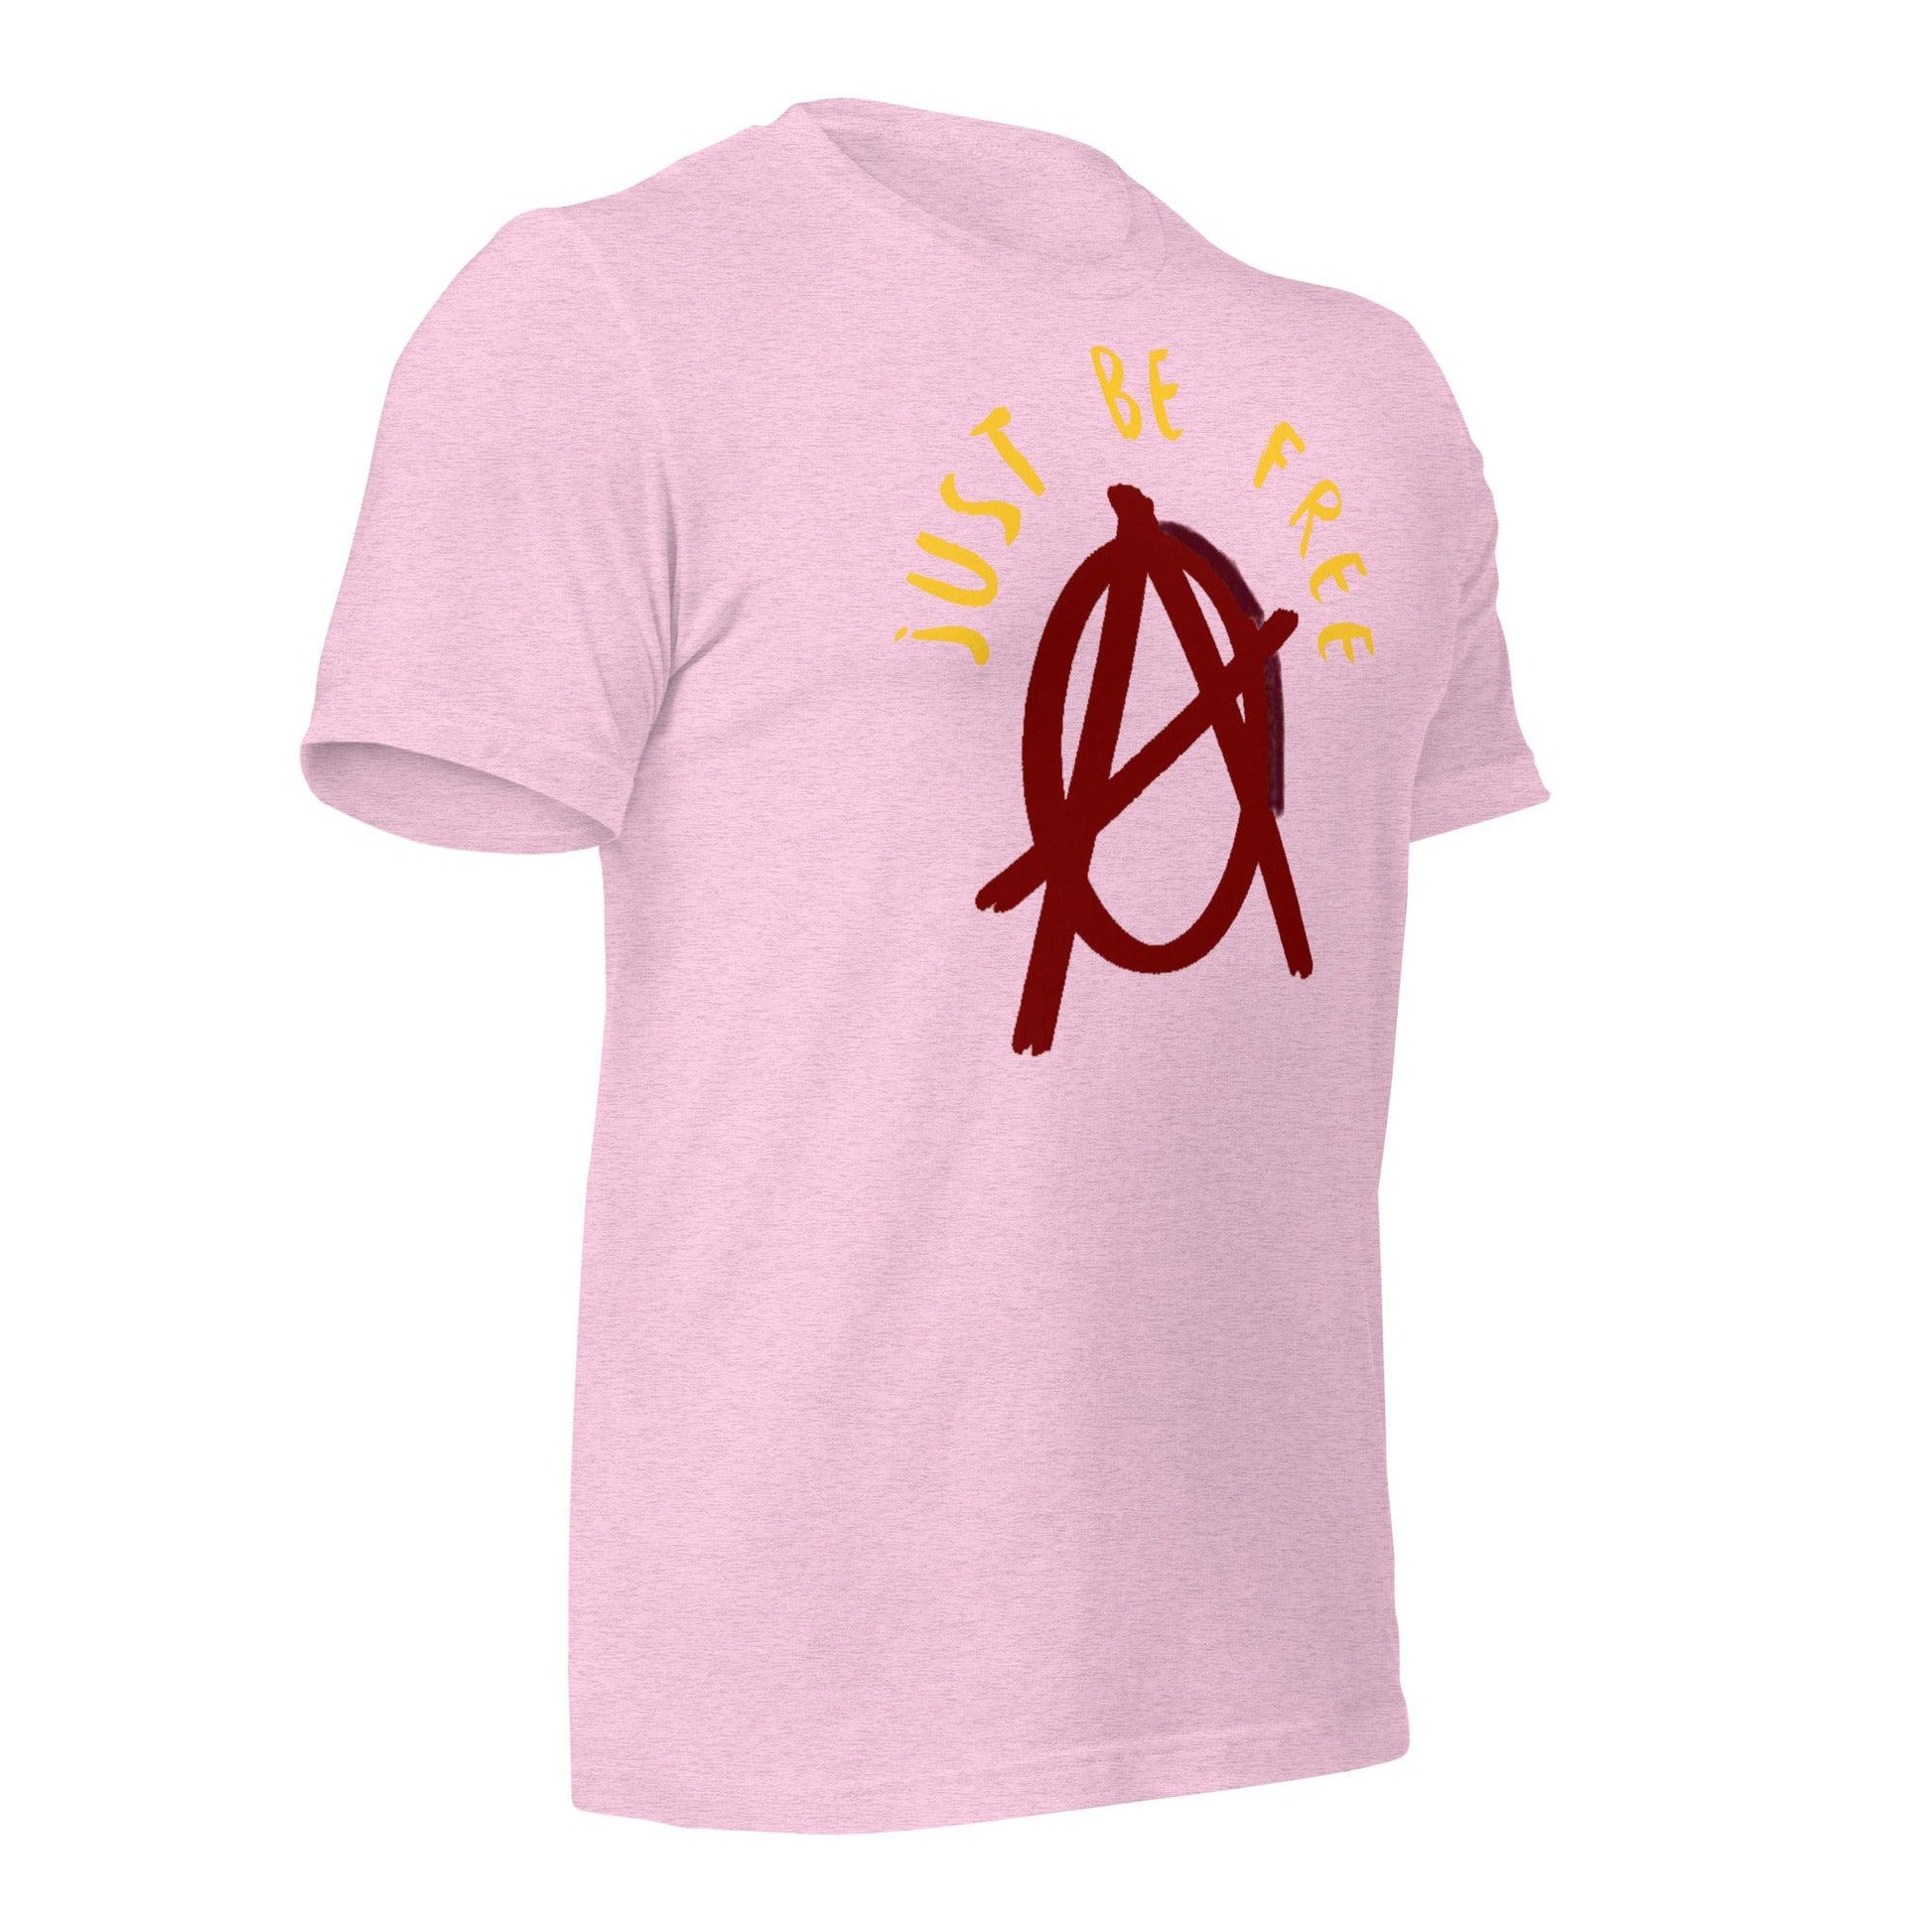 Anarchy Wear "Just Be Free" Red Pastels Unisex t-shirt - AnarchyWear